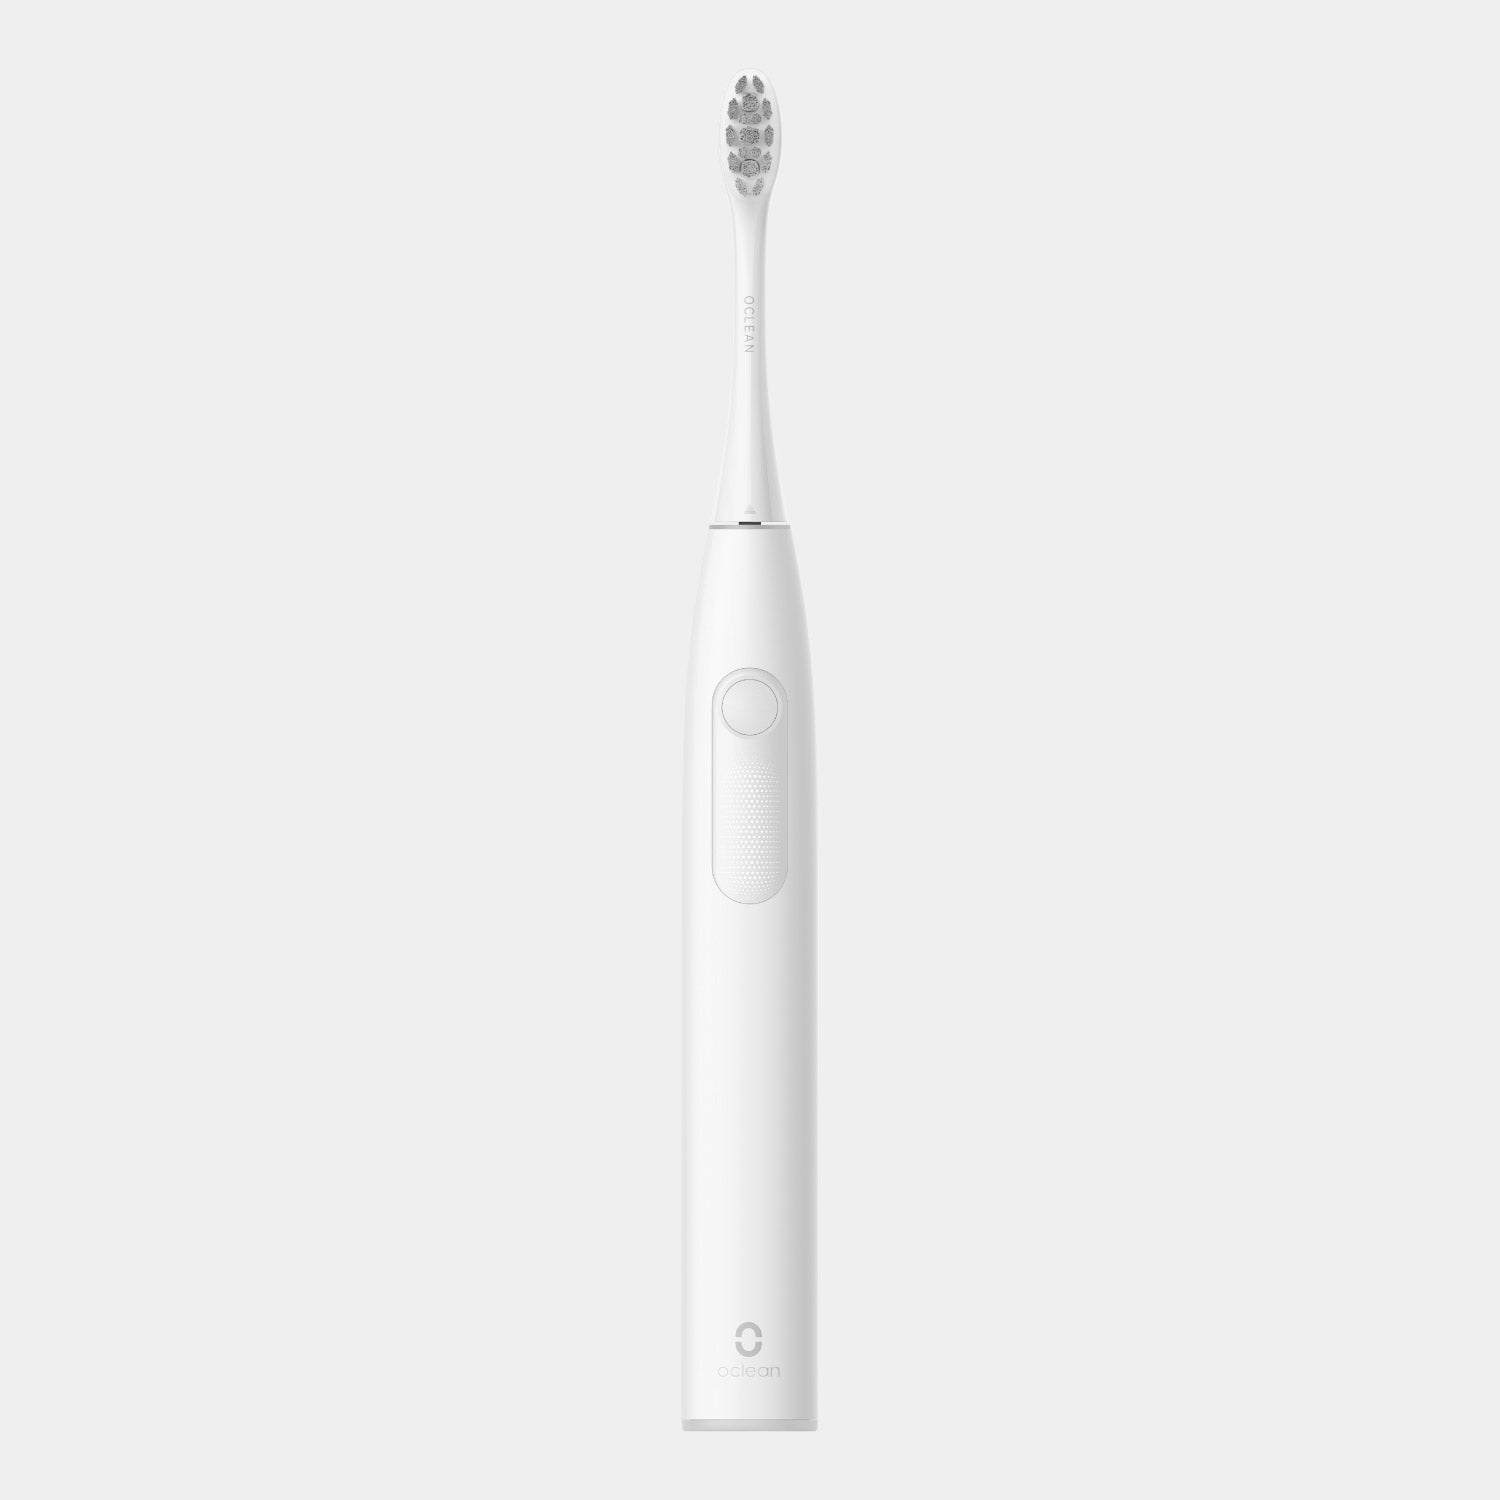 Oclean Z1 Electric Toothbrush-Toothbrushes-Oclean Global Store